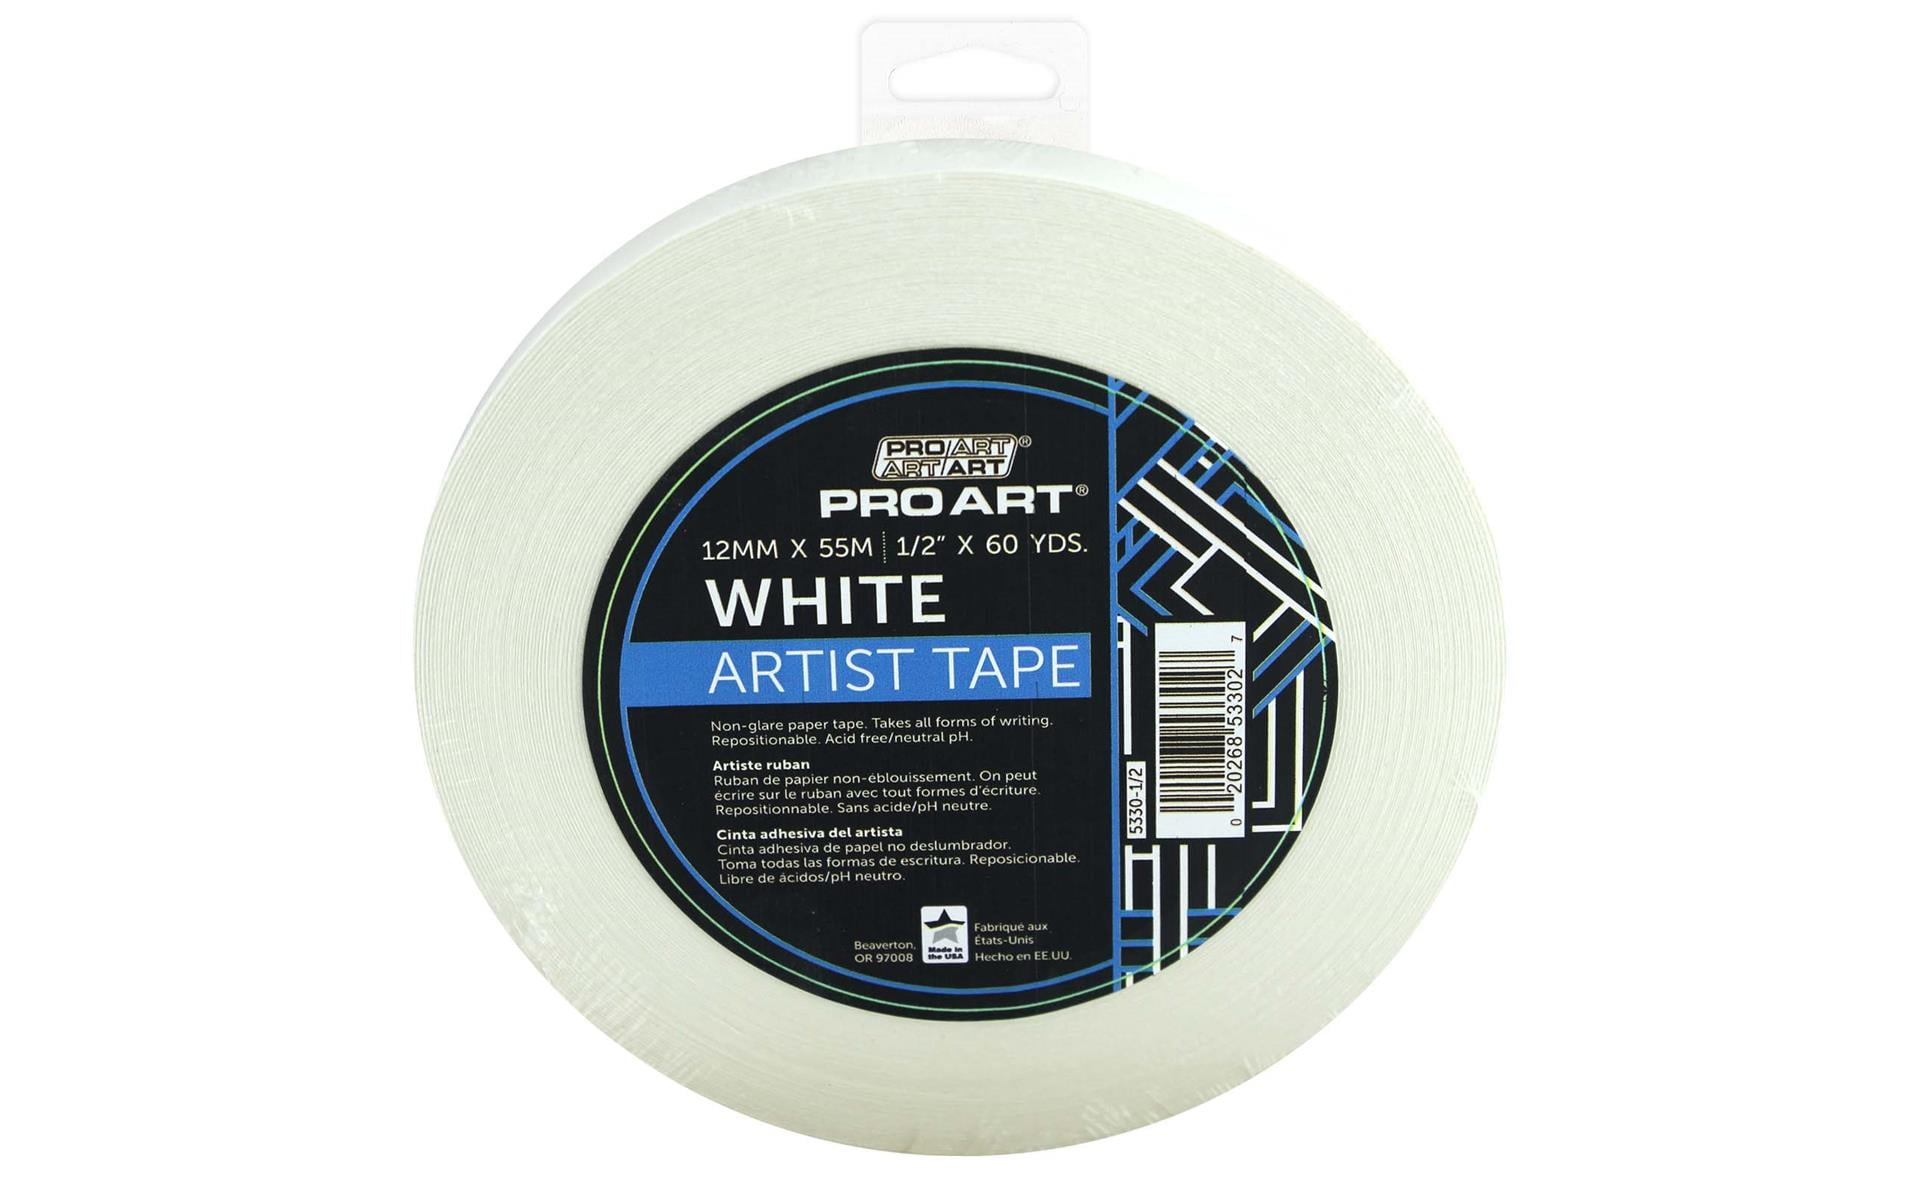 Pro Tapes White Framers Tape 1 x 20yd – Opus Art Supplies